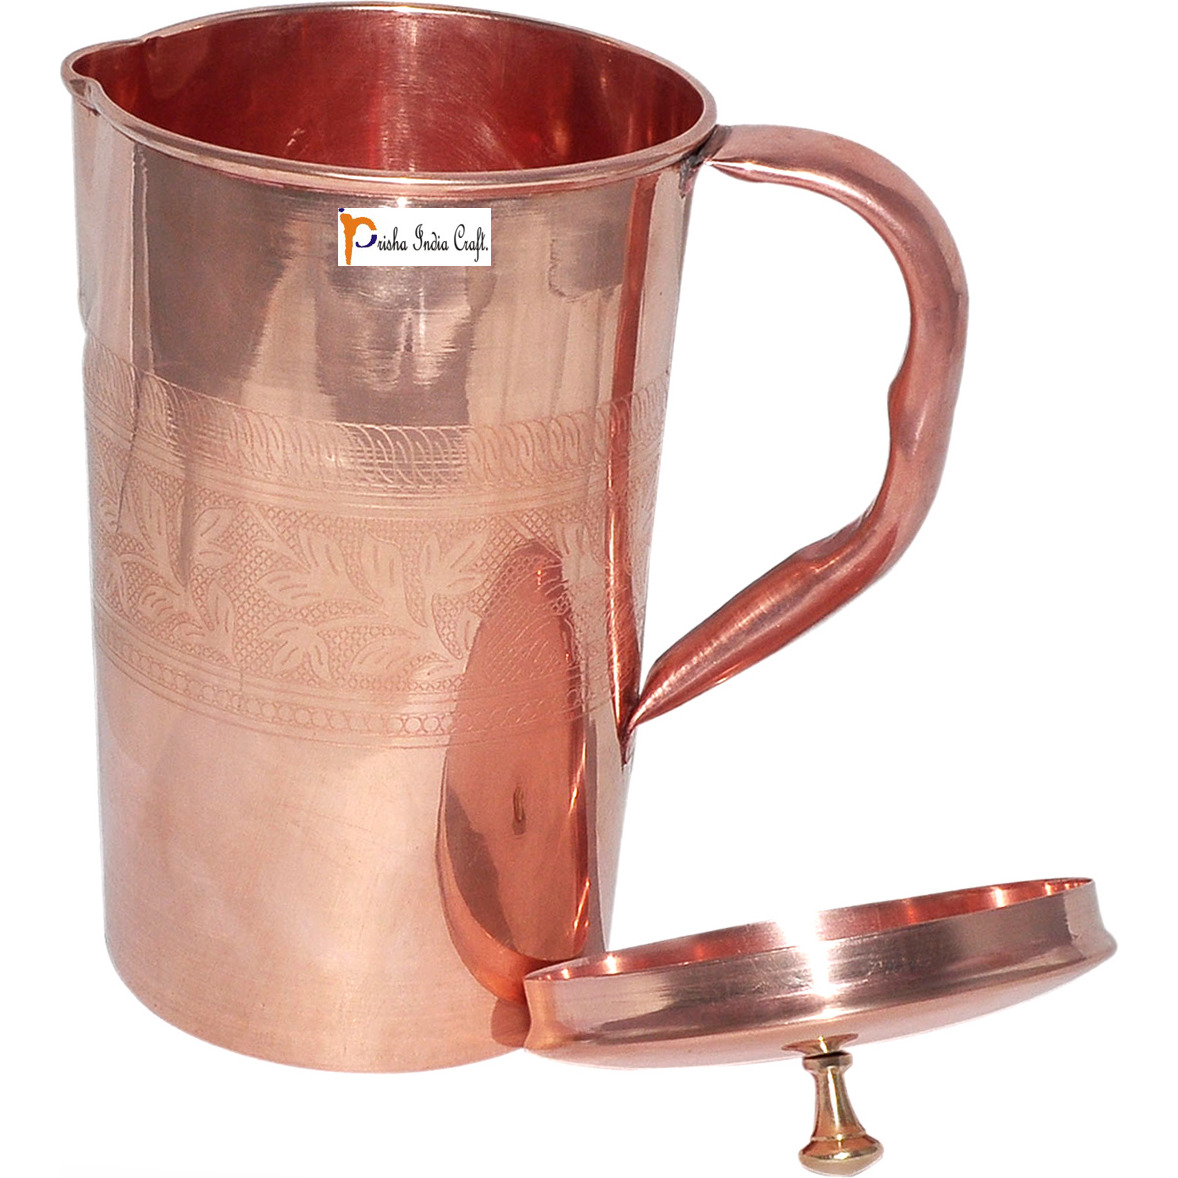 Prisha India Craft B. Set of 3 Dinnerware Traditional Stainless Steel Copper Dinner Set of Thali Plate, Bowls, Glass and Spoon, Dia 13  With 1 Pure Copper Embossed Pitcher Jug - Christmas Gift